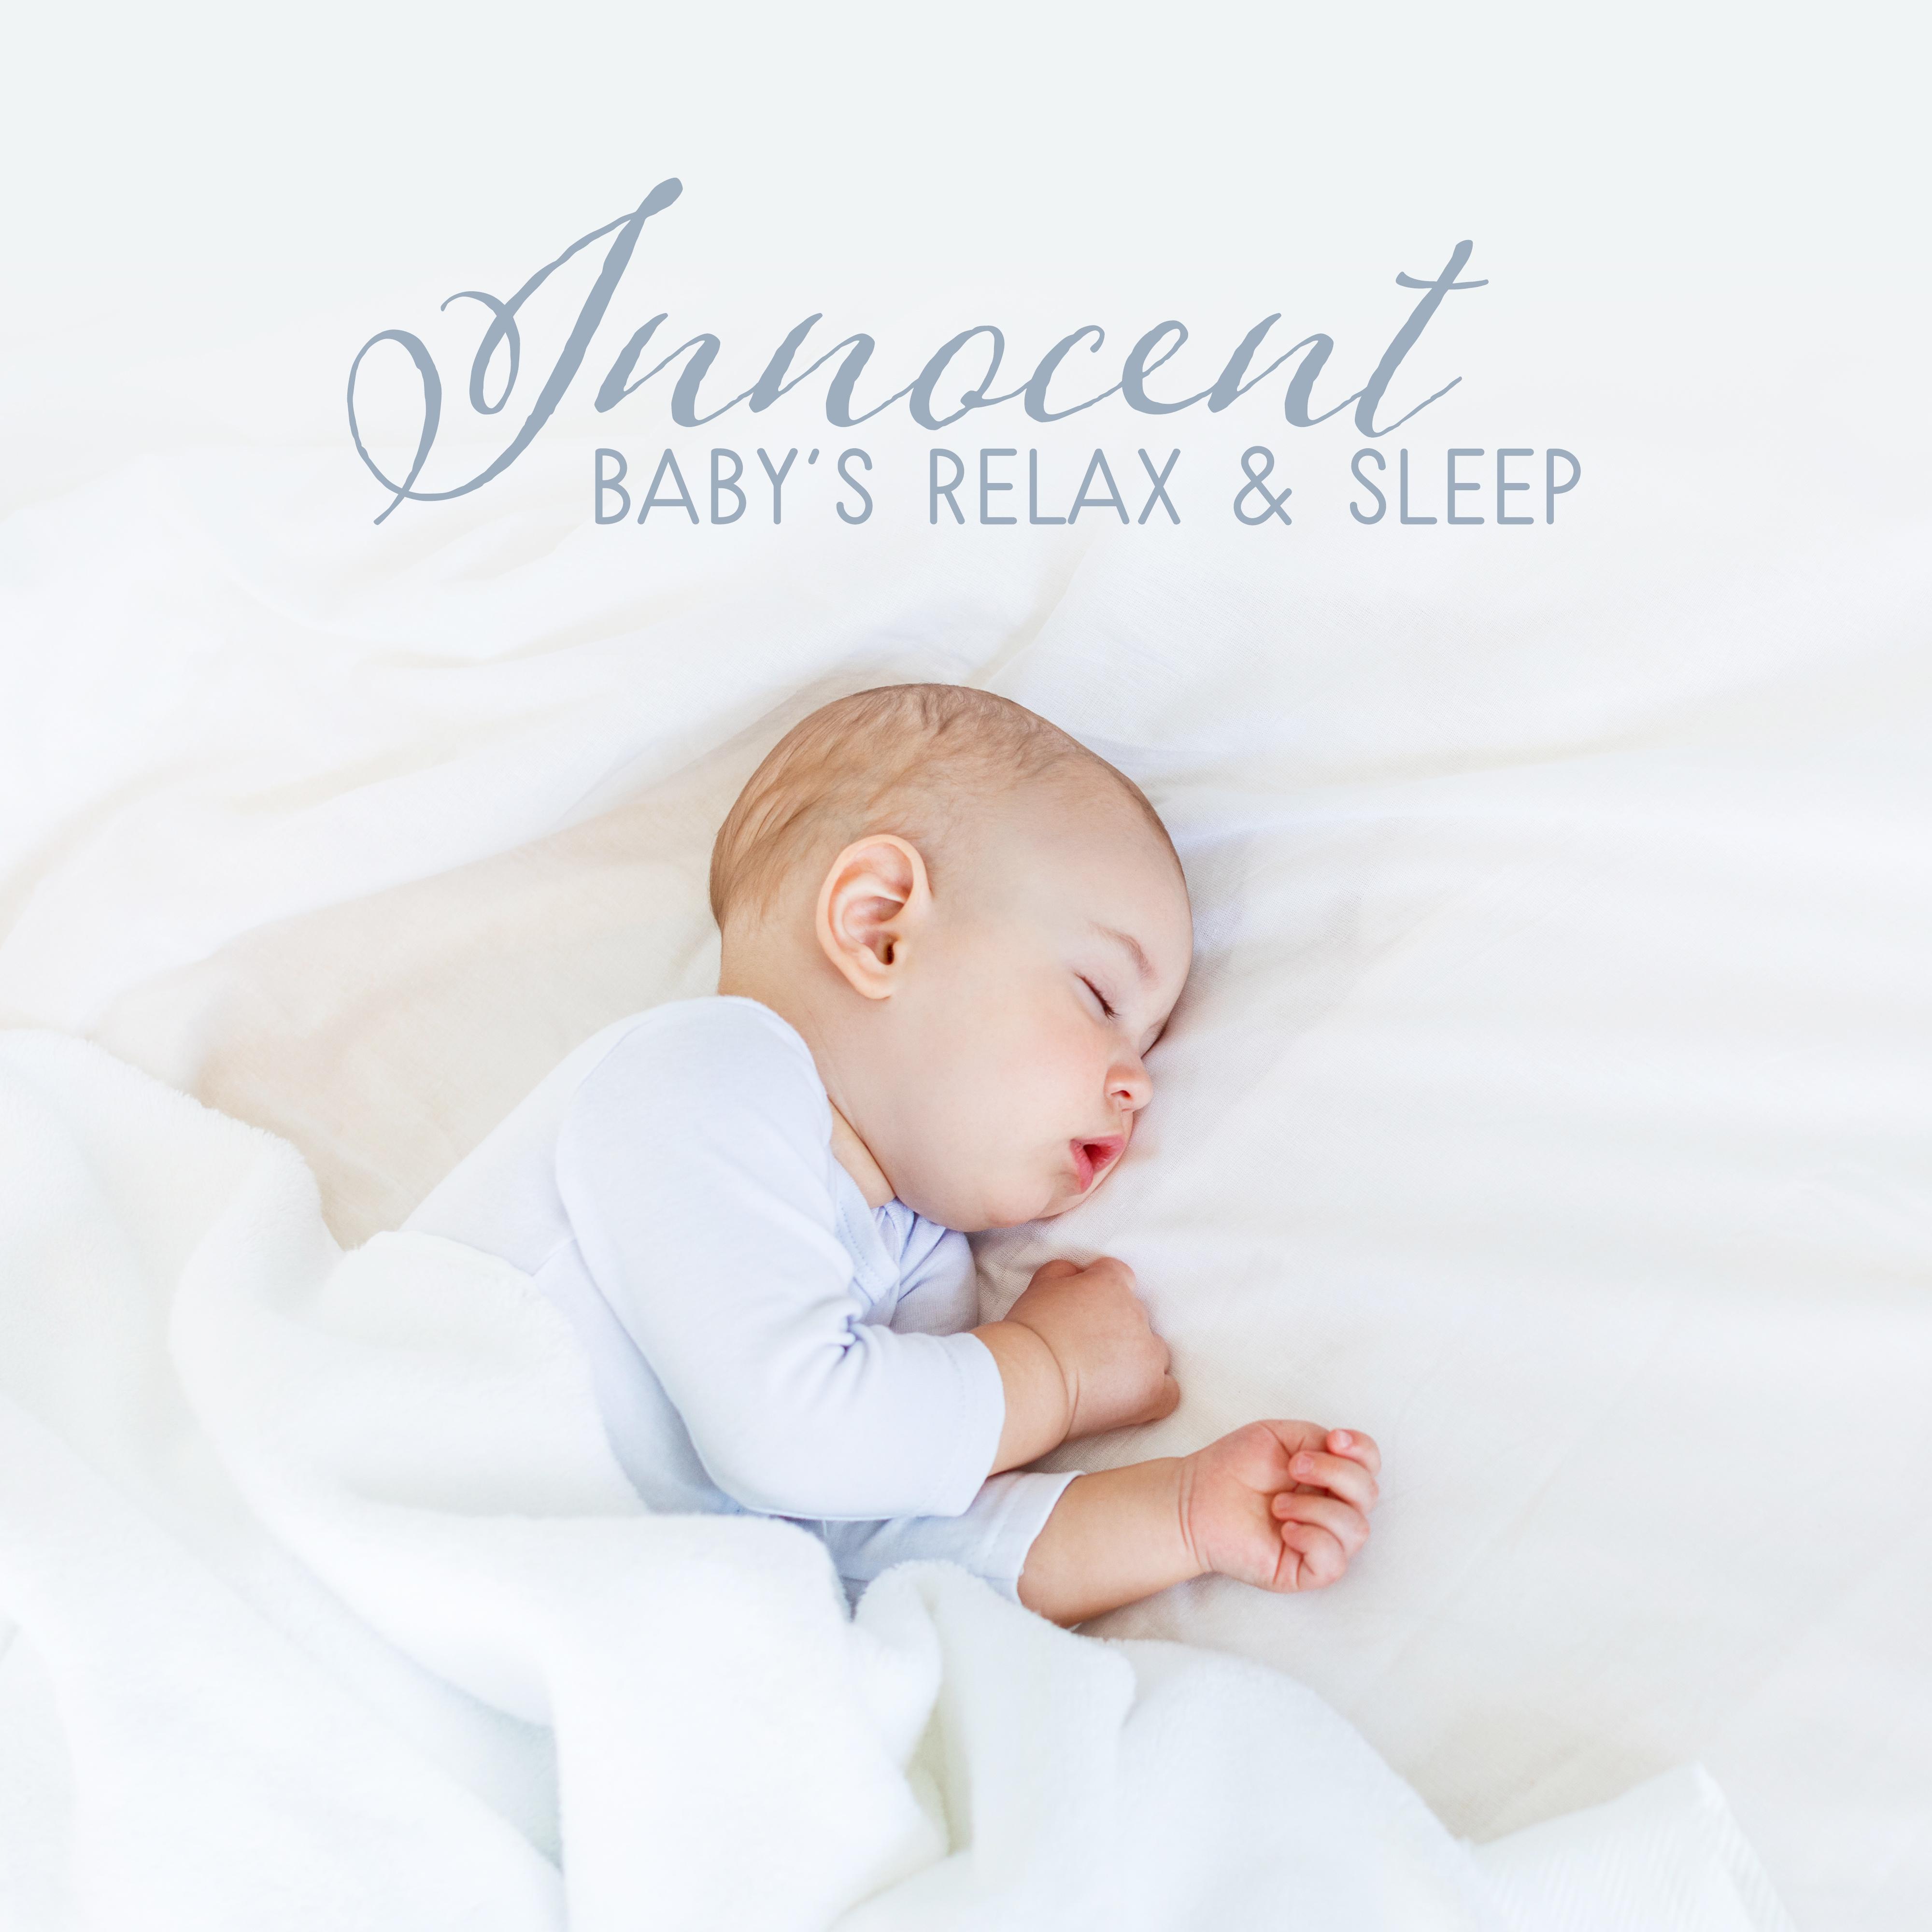 Innocent Baby' s Relax  Sleep: 2019 Soft New Age Music for Best Sleep Experience, Calming Down, Rest  Relax